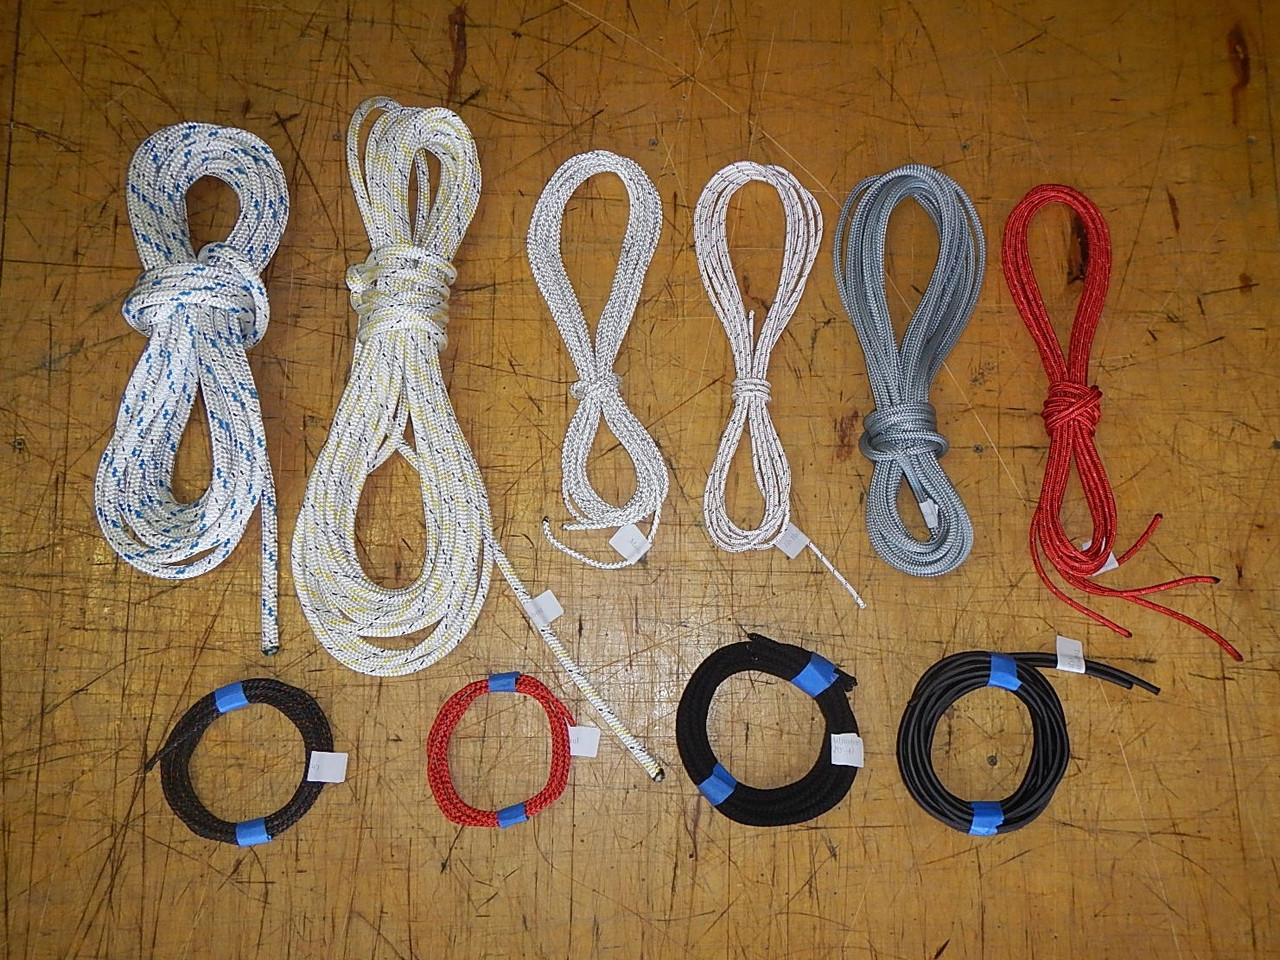 Replacement line kit for Hobie 16 with quality ropes from Marlow, Bainbridge, or Samson. 